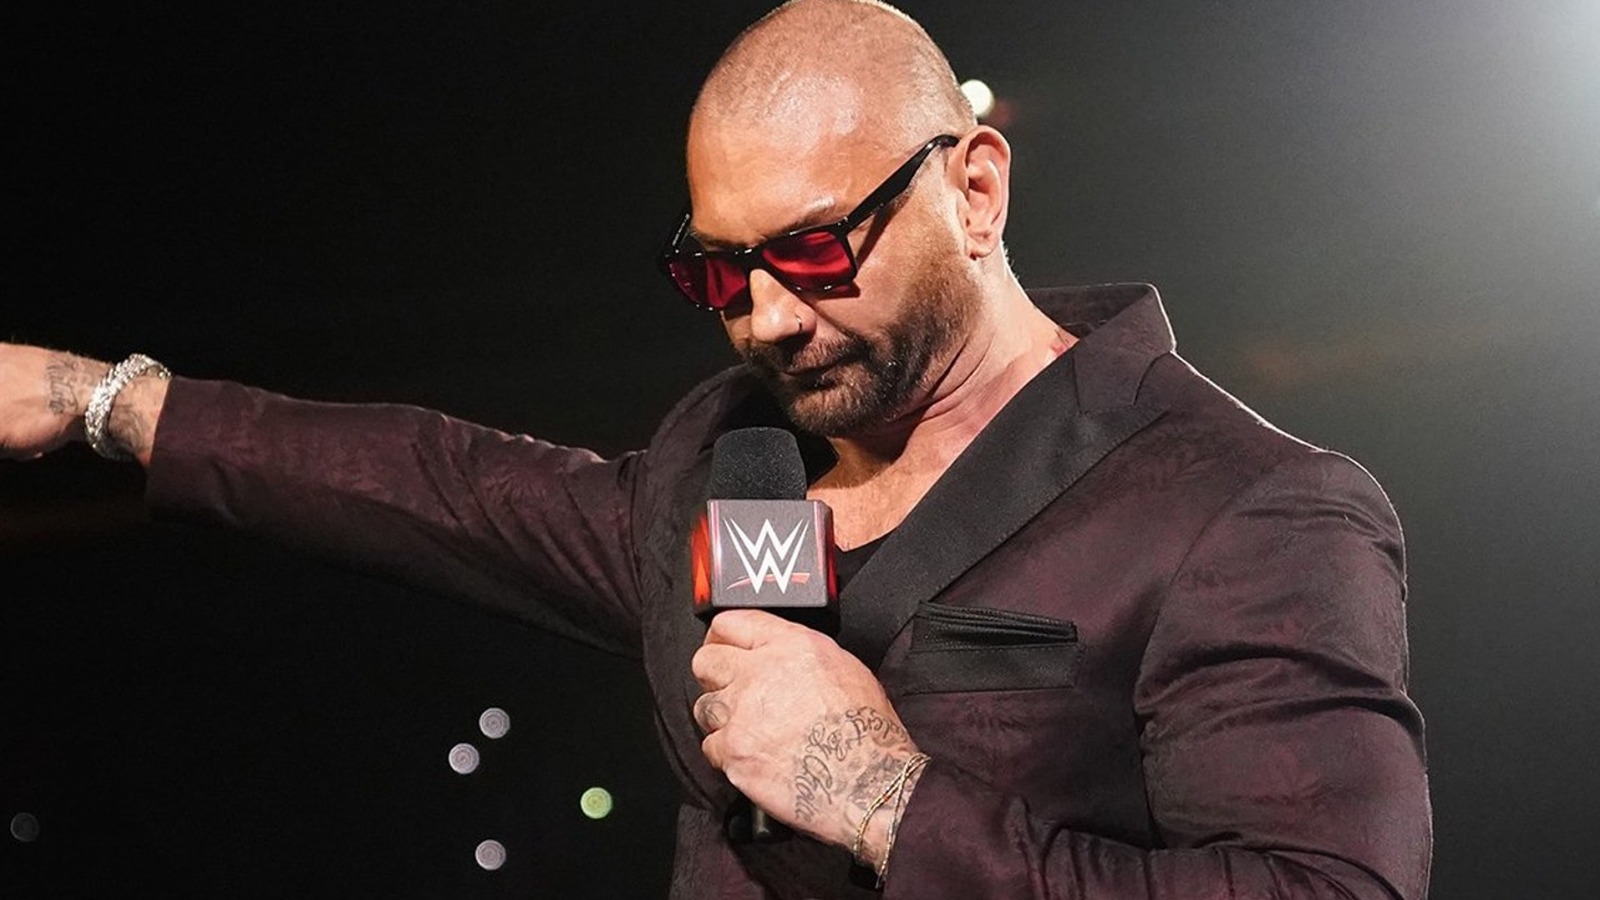 The Tragic Side Of Dave Bautista's Real Life